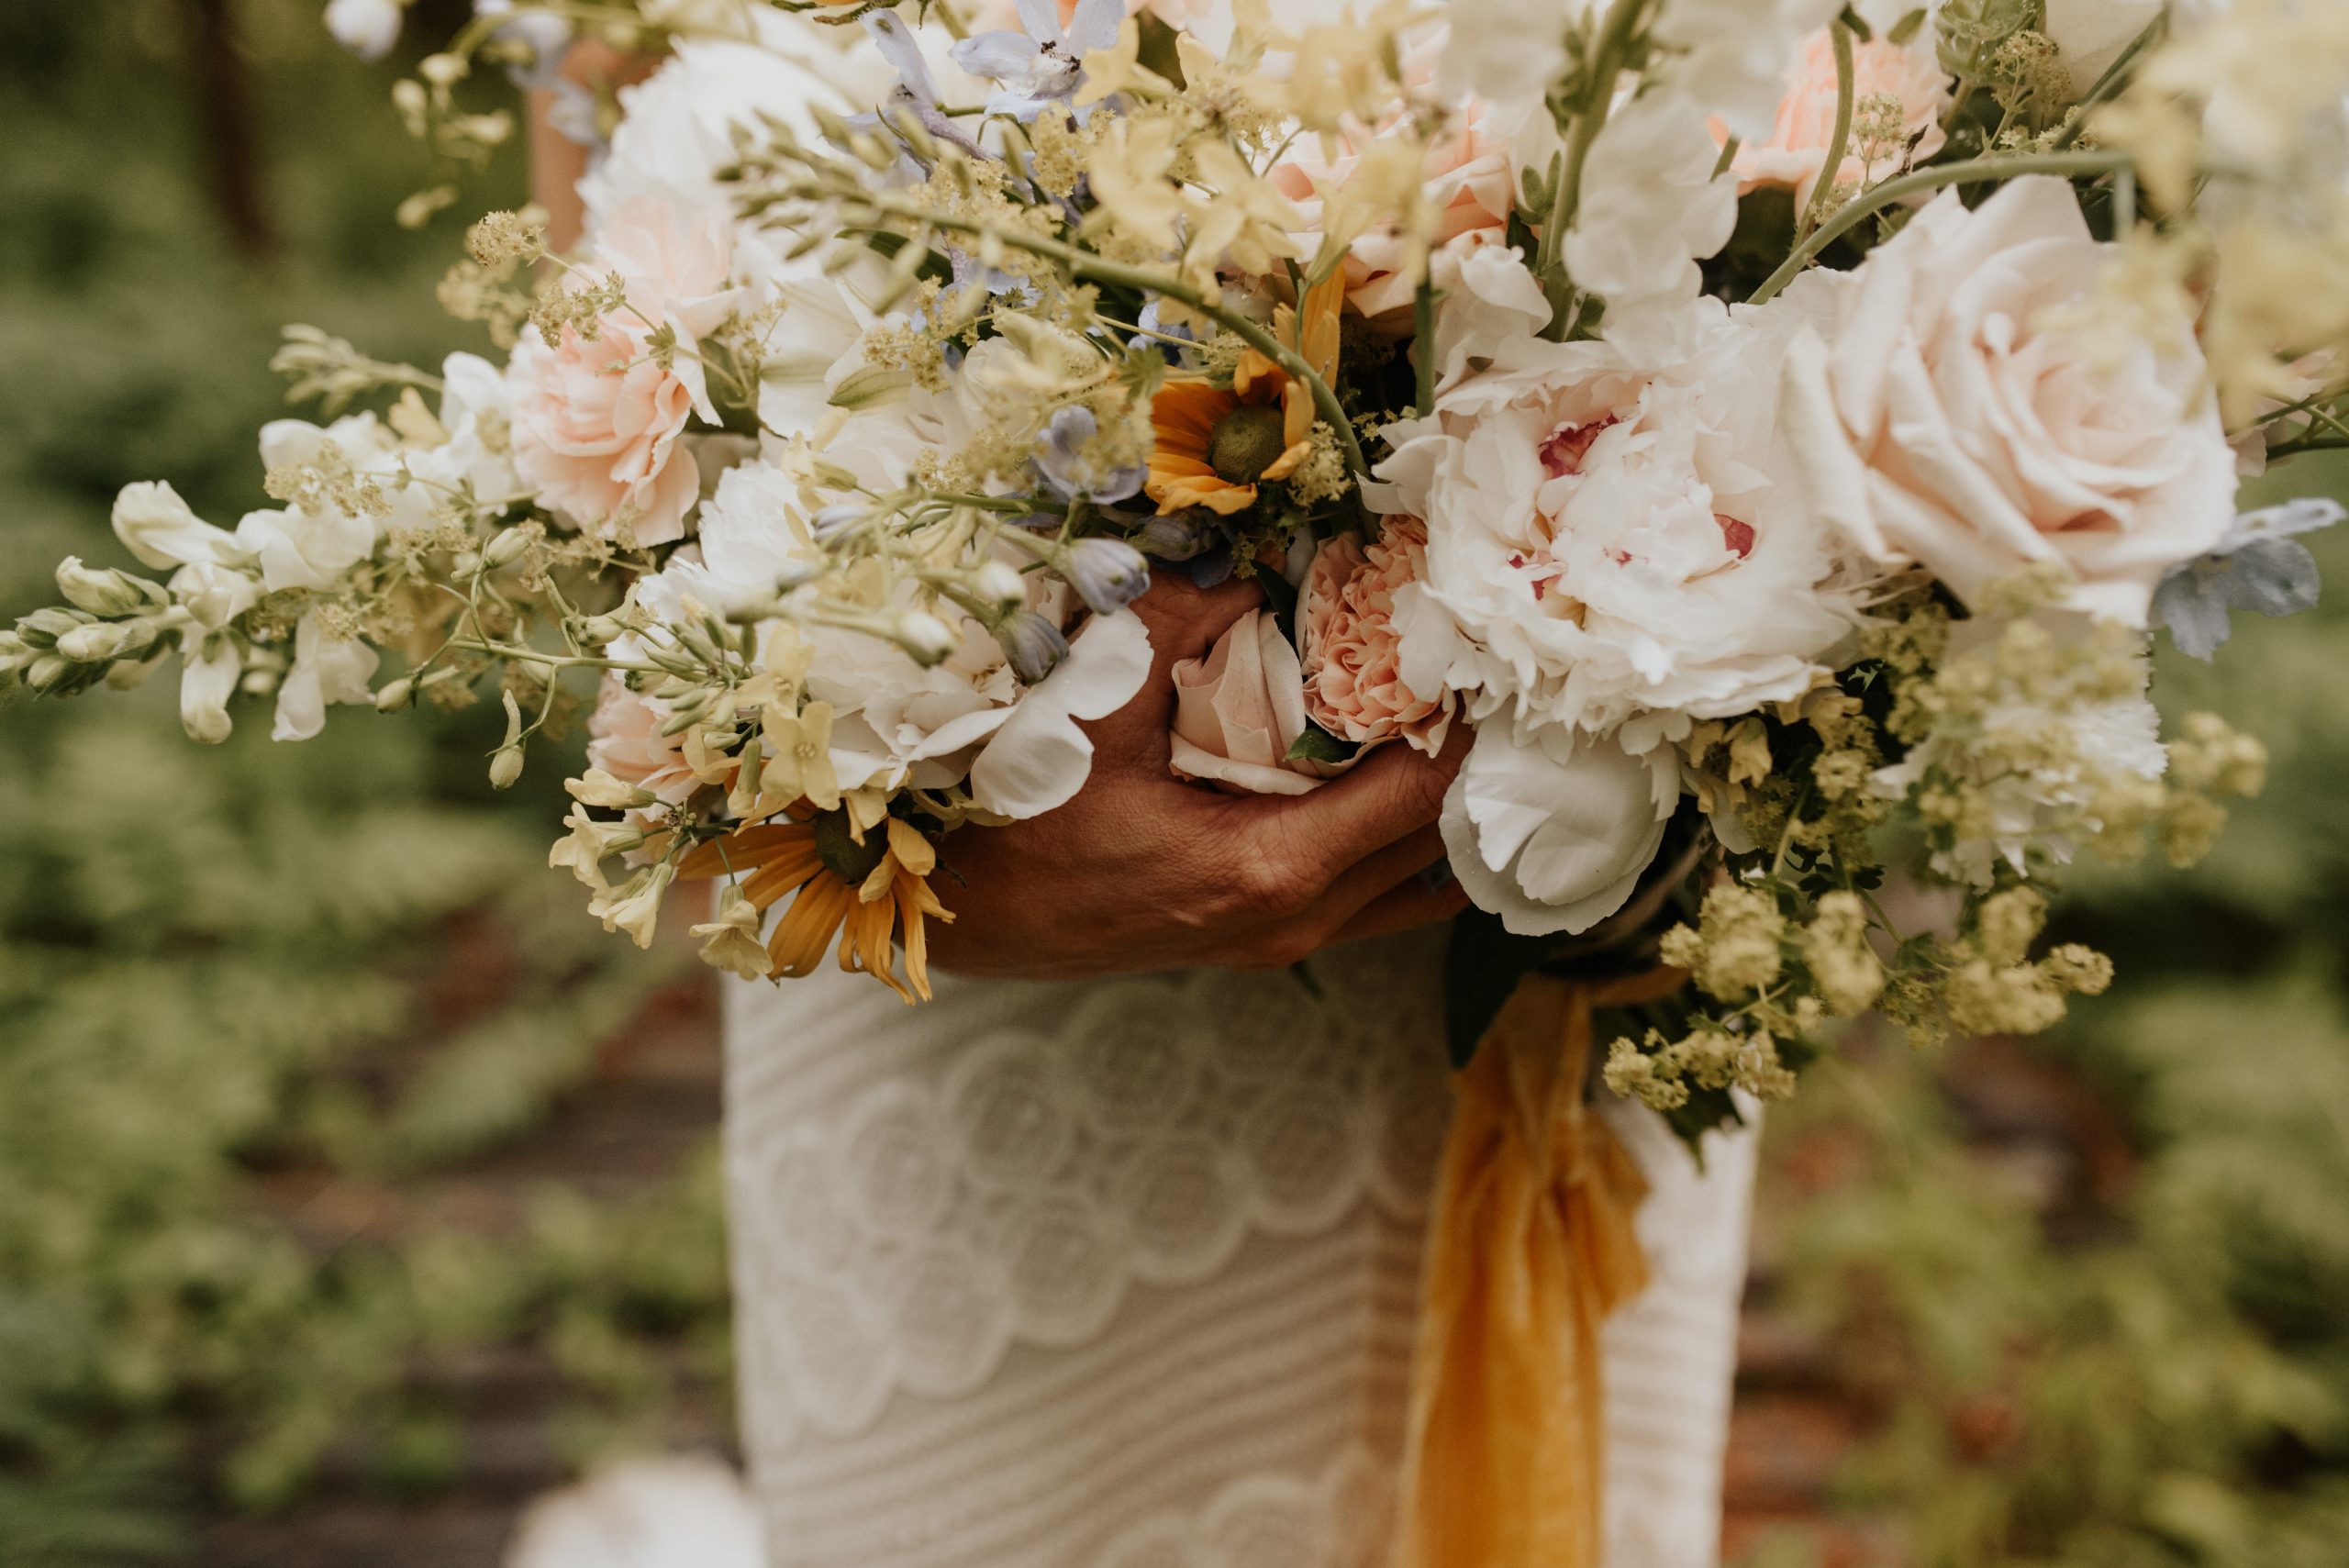 How To Start A Wedding Florist Business-All You Need To Know